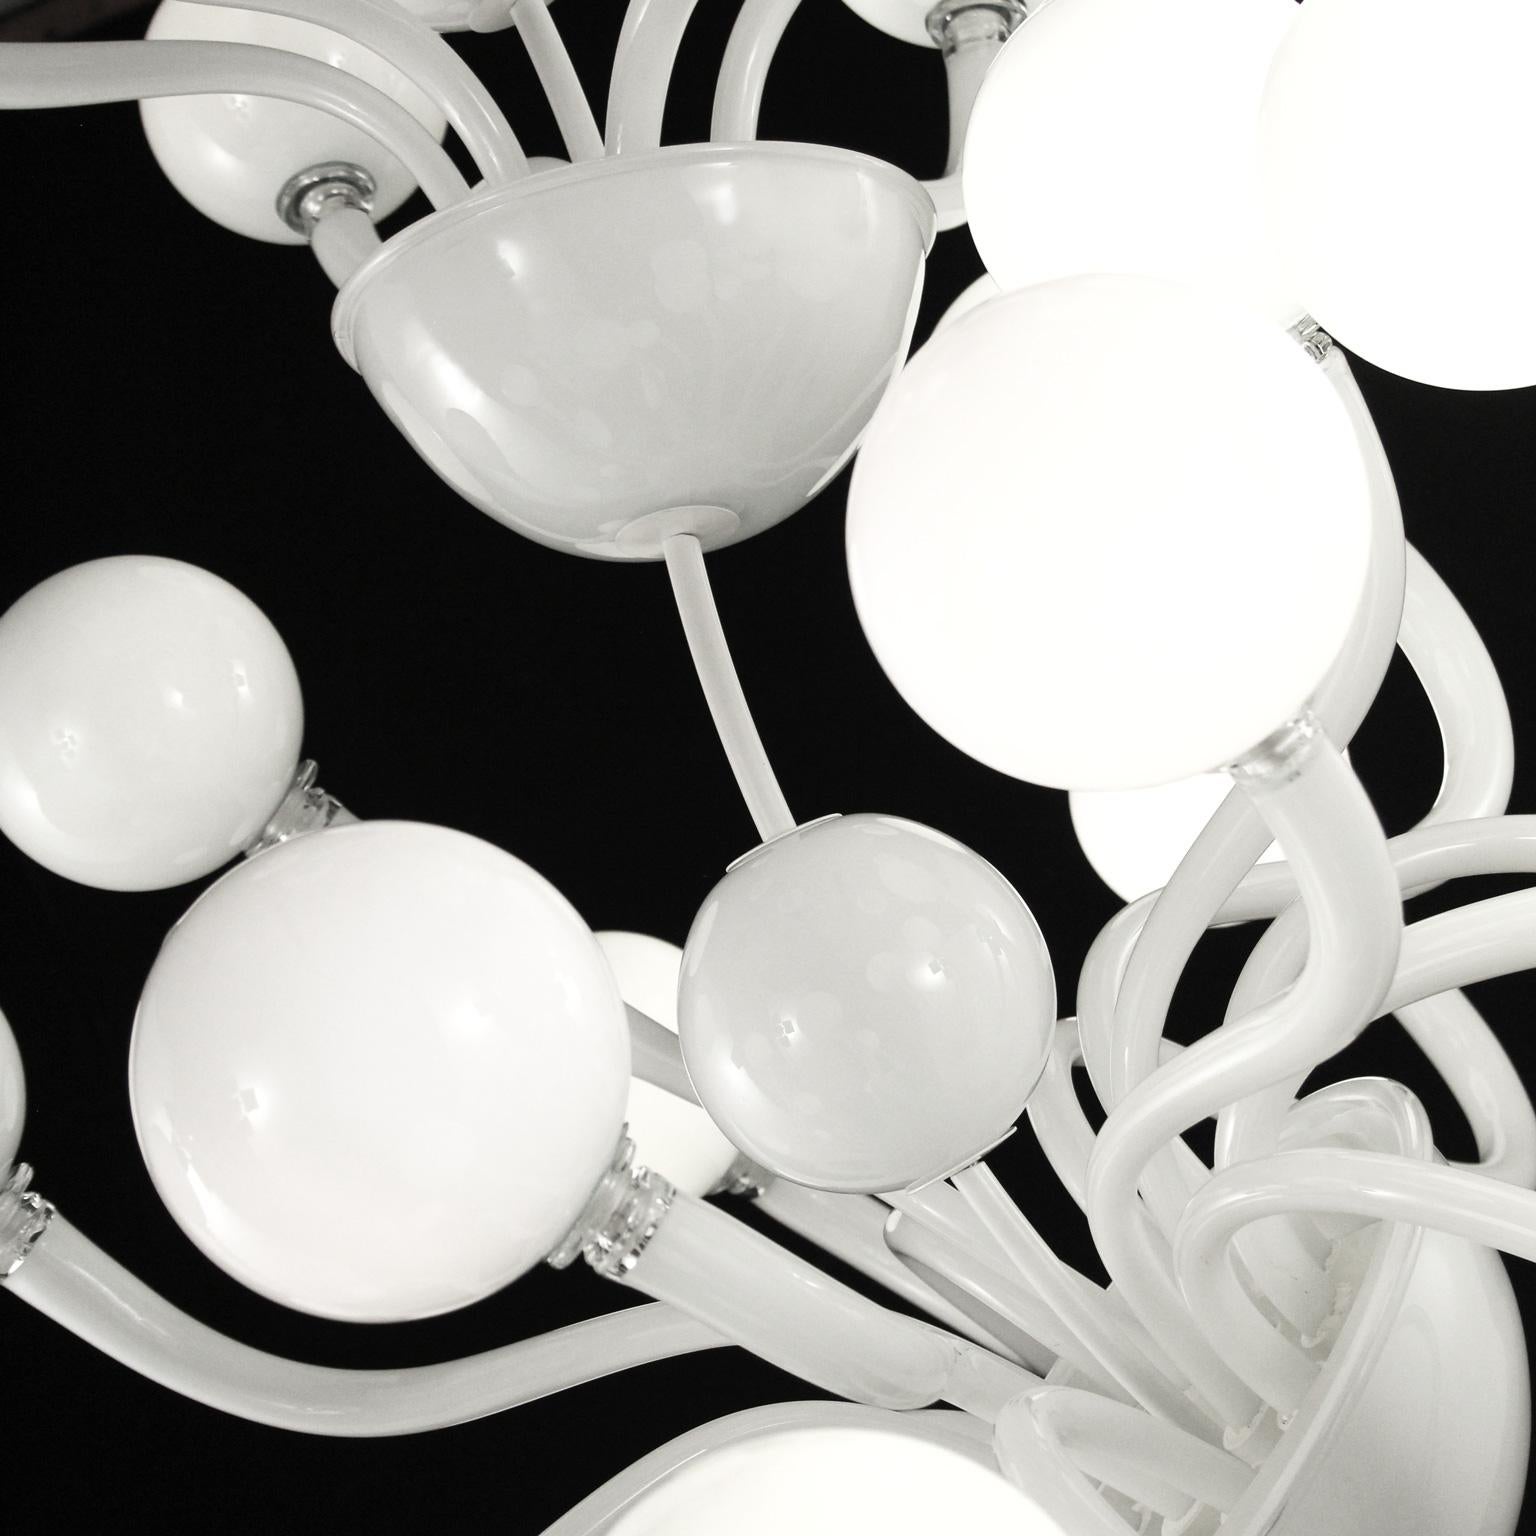 Italian 21st Century Artistic  Chandelier 24 Arms White Murano Glass by Multiforme For Sale